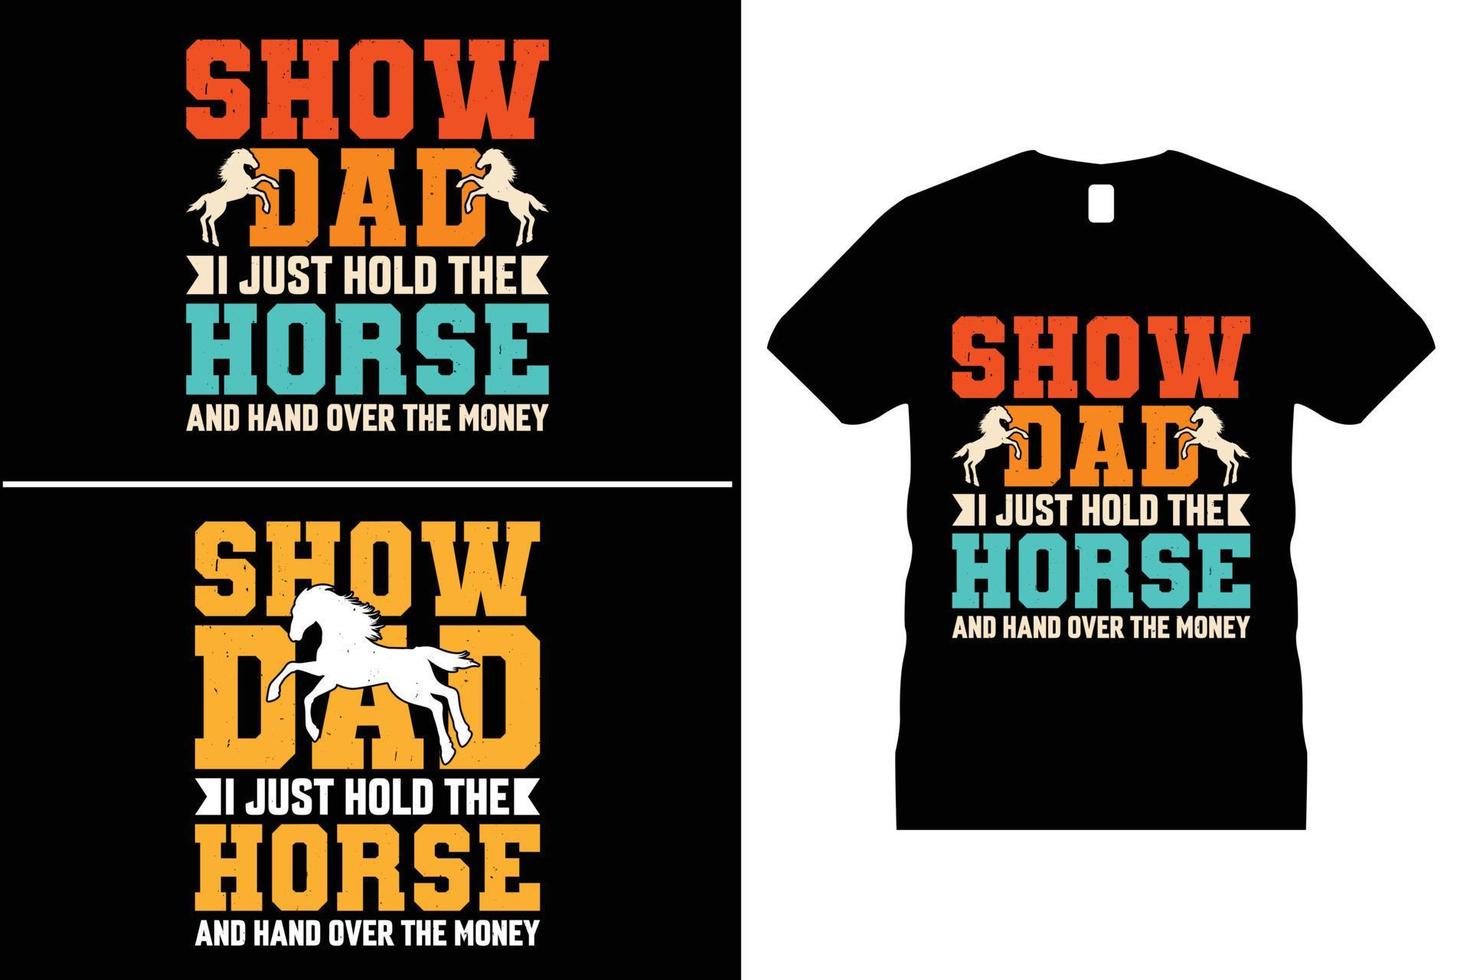 Horse Tshirt design, Funny Horse Lover vector. Use for T-Shirt, mugs, stickers, Cards, etc. vector